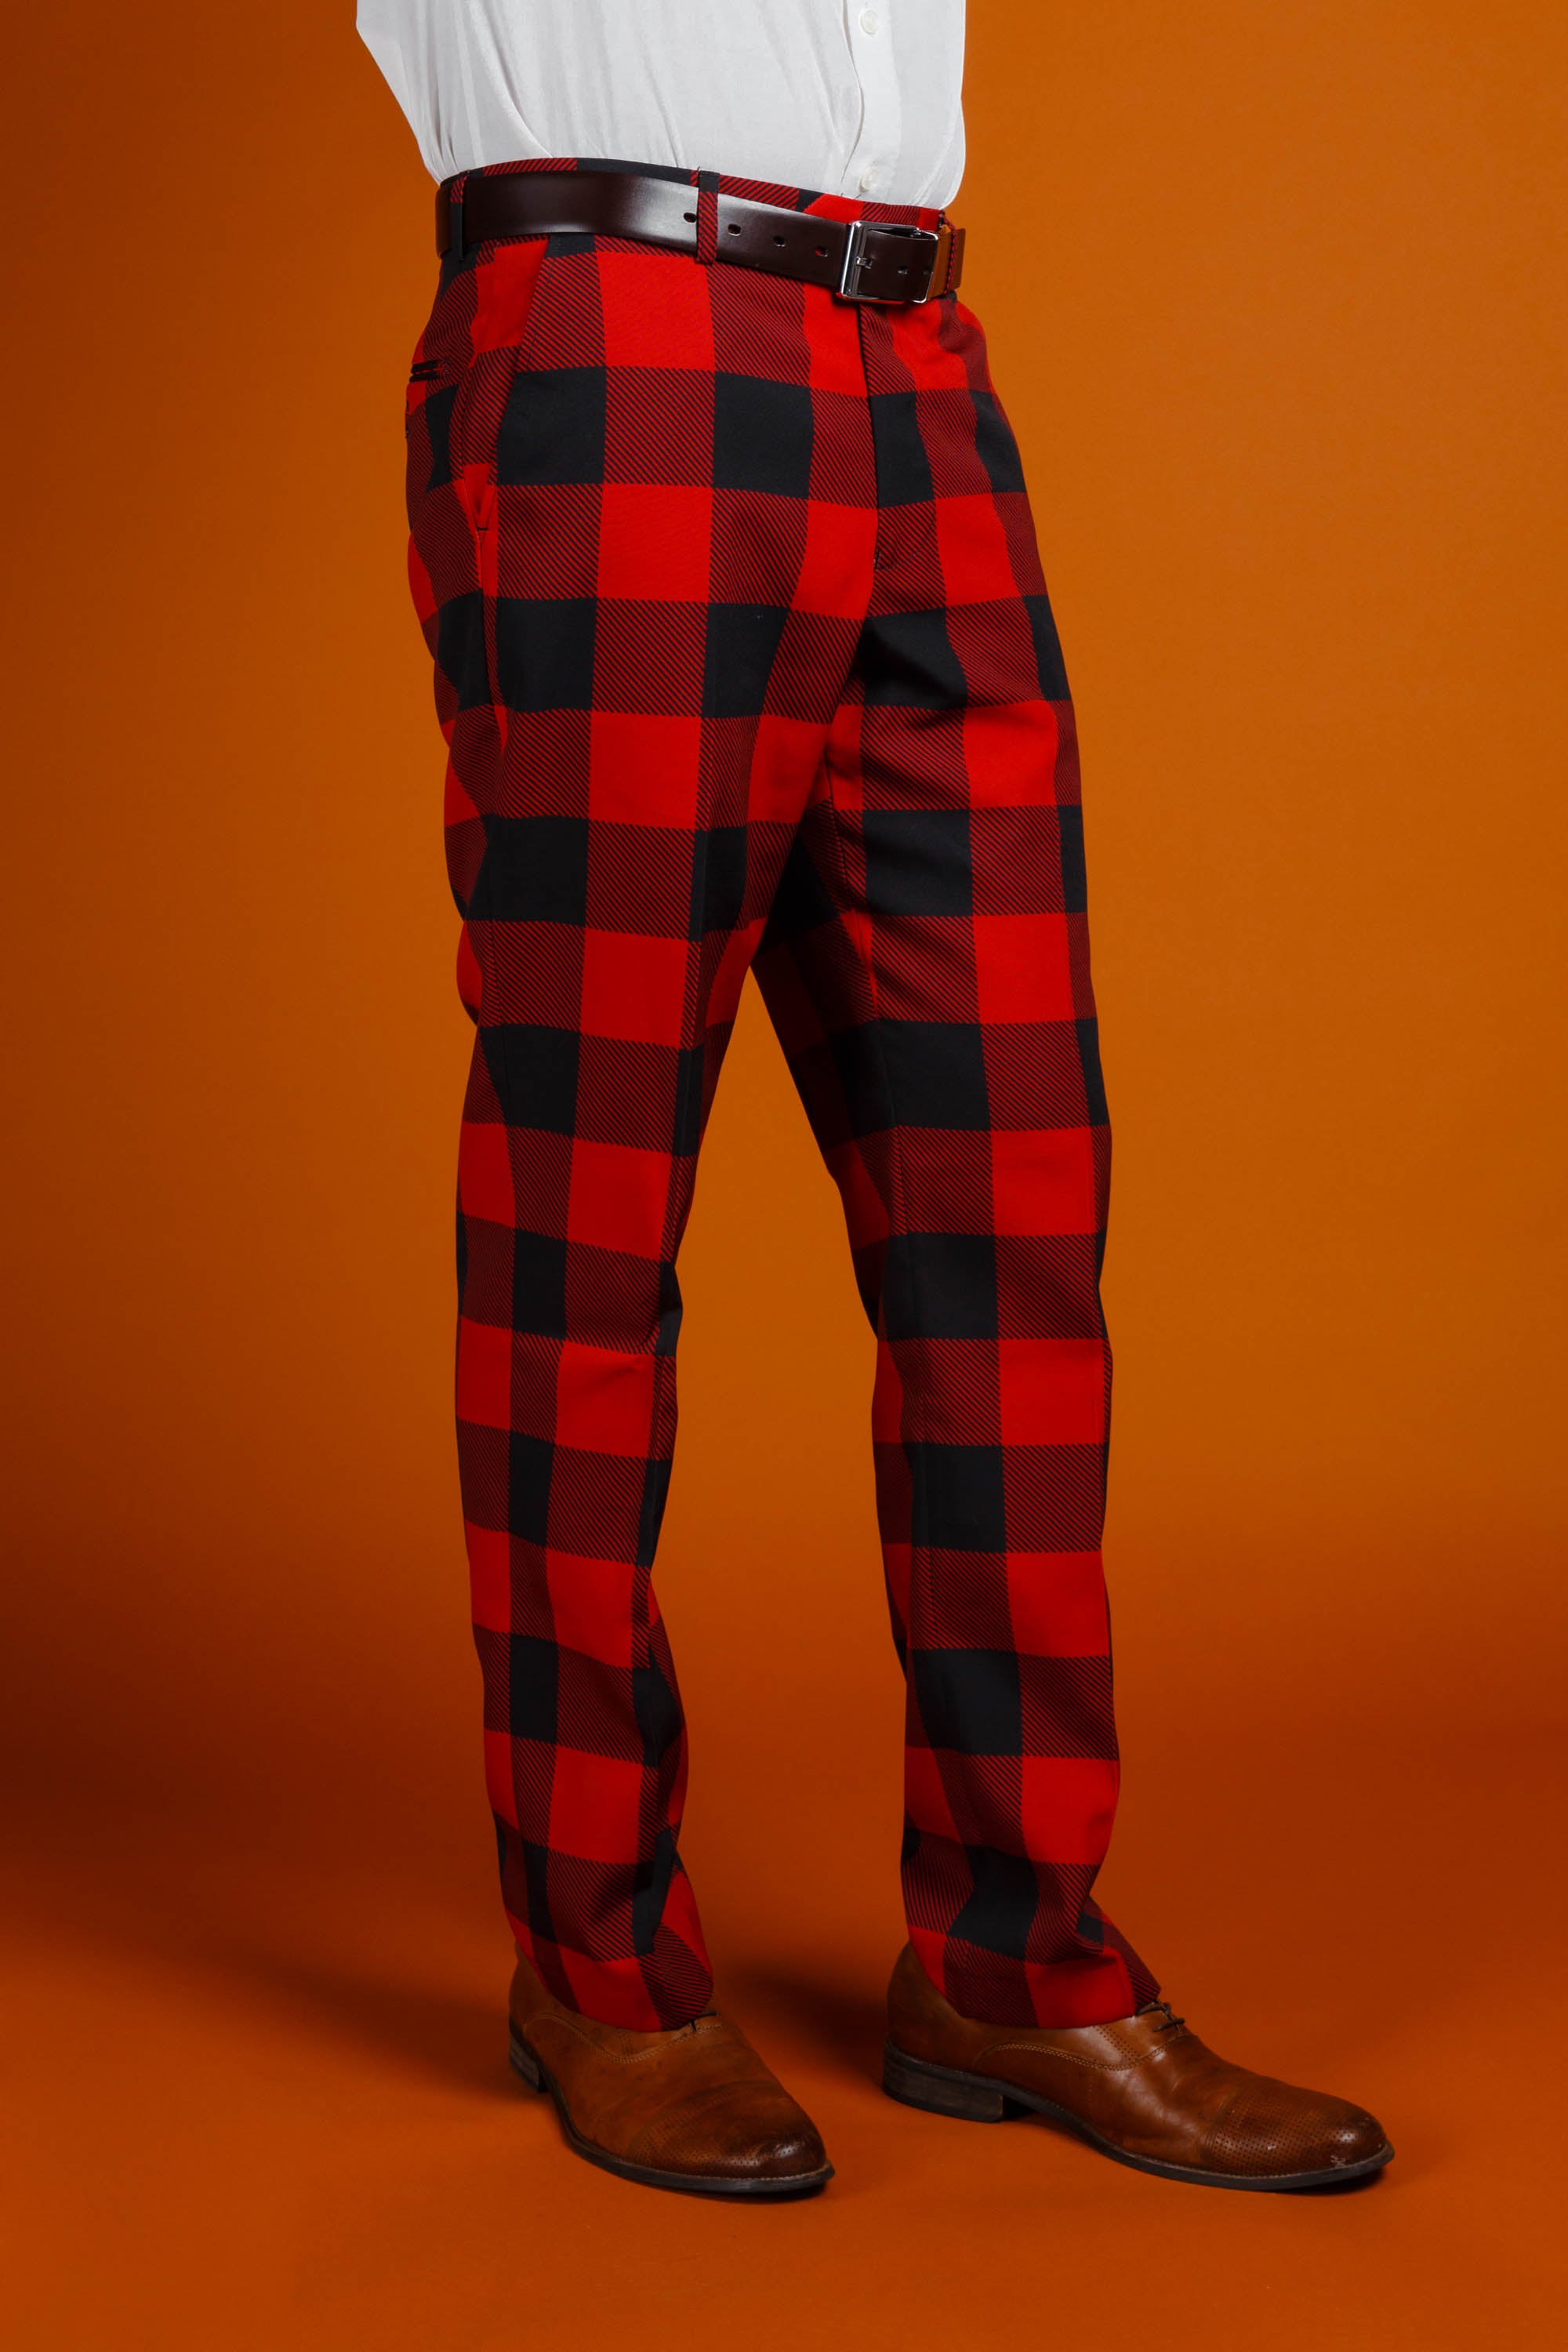 Tiger Laced Up Pants Red Plaid - XXS | Red plaid pants, Plaid outfits, Red  plaid dress